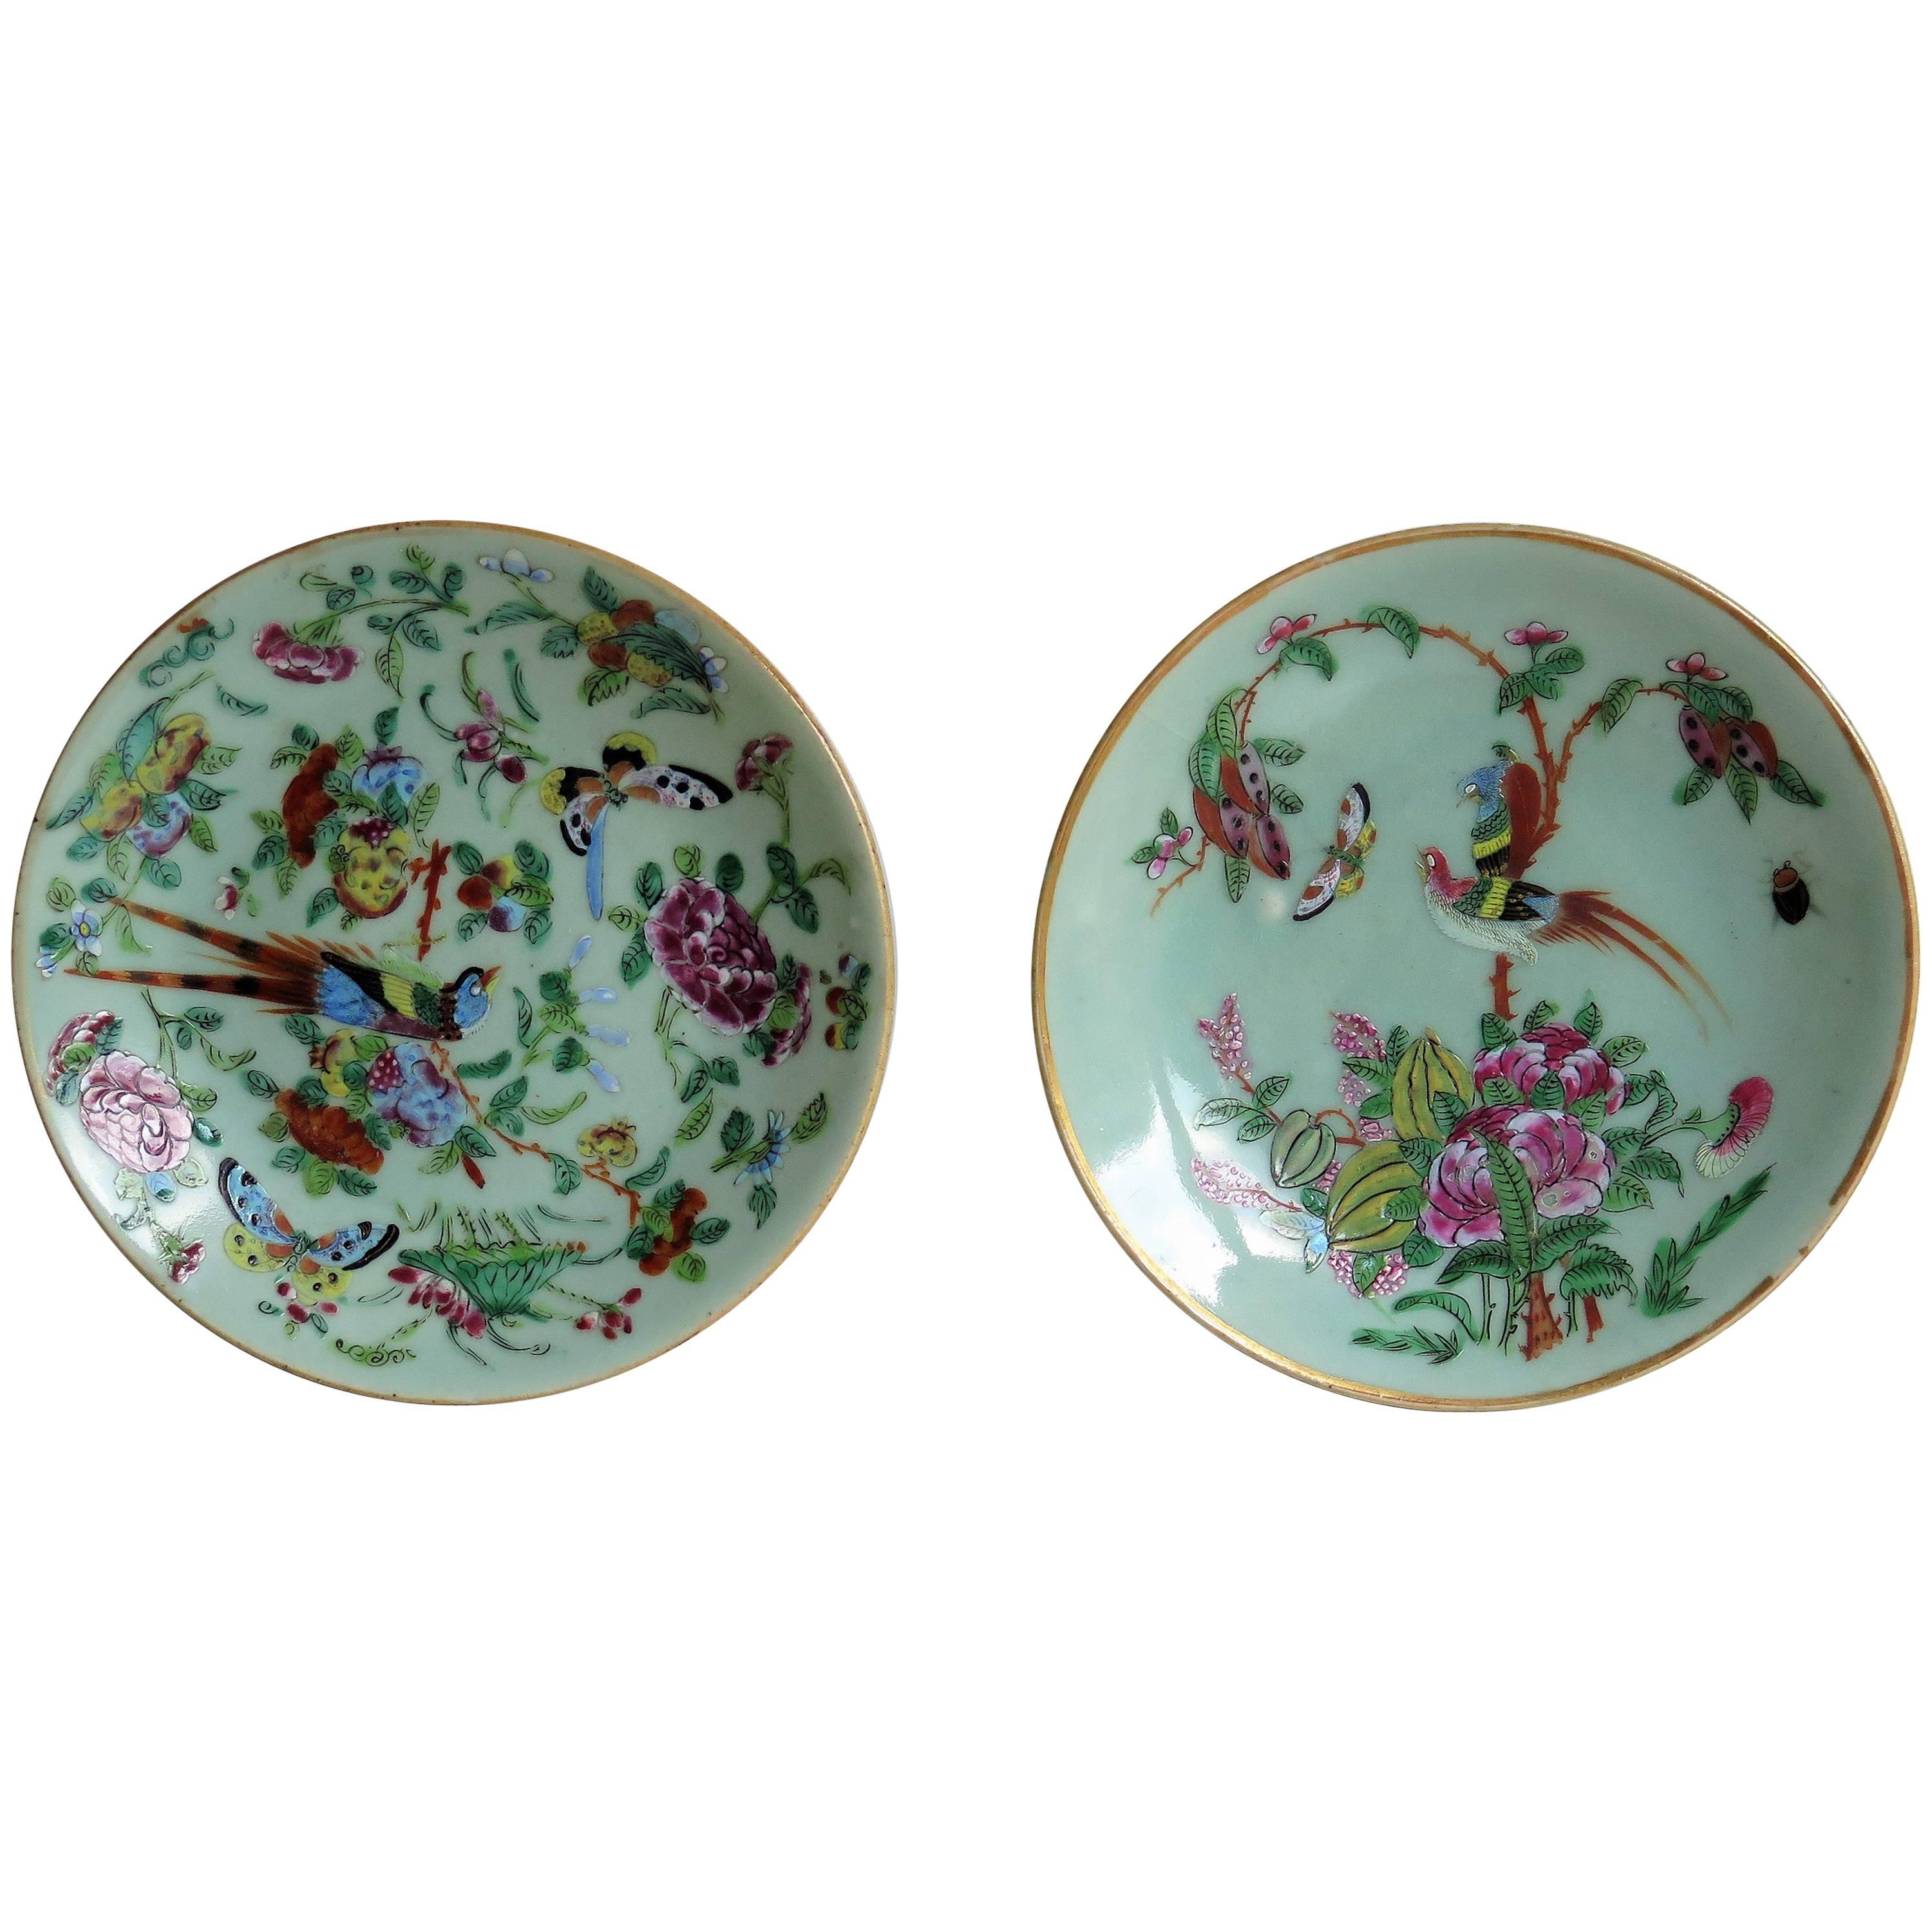 Two Chinese Plates, Porcelain, Celadon, Birds and Butterflies, Qing, circa 1830